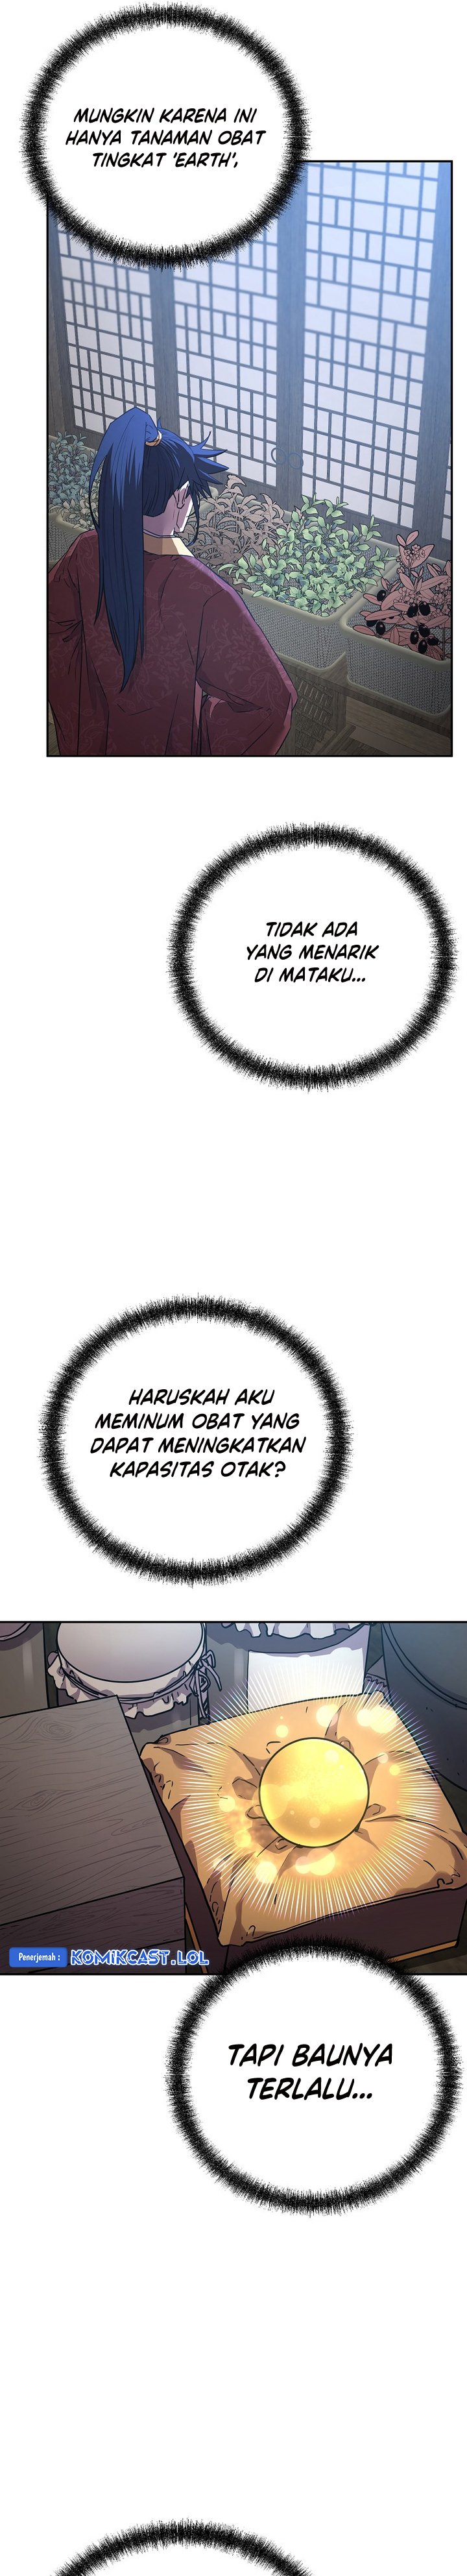 reincarnation-of-the-murim-clans-former-ranker Chapter 108